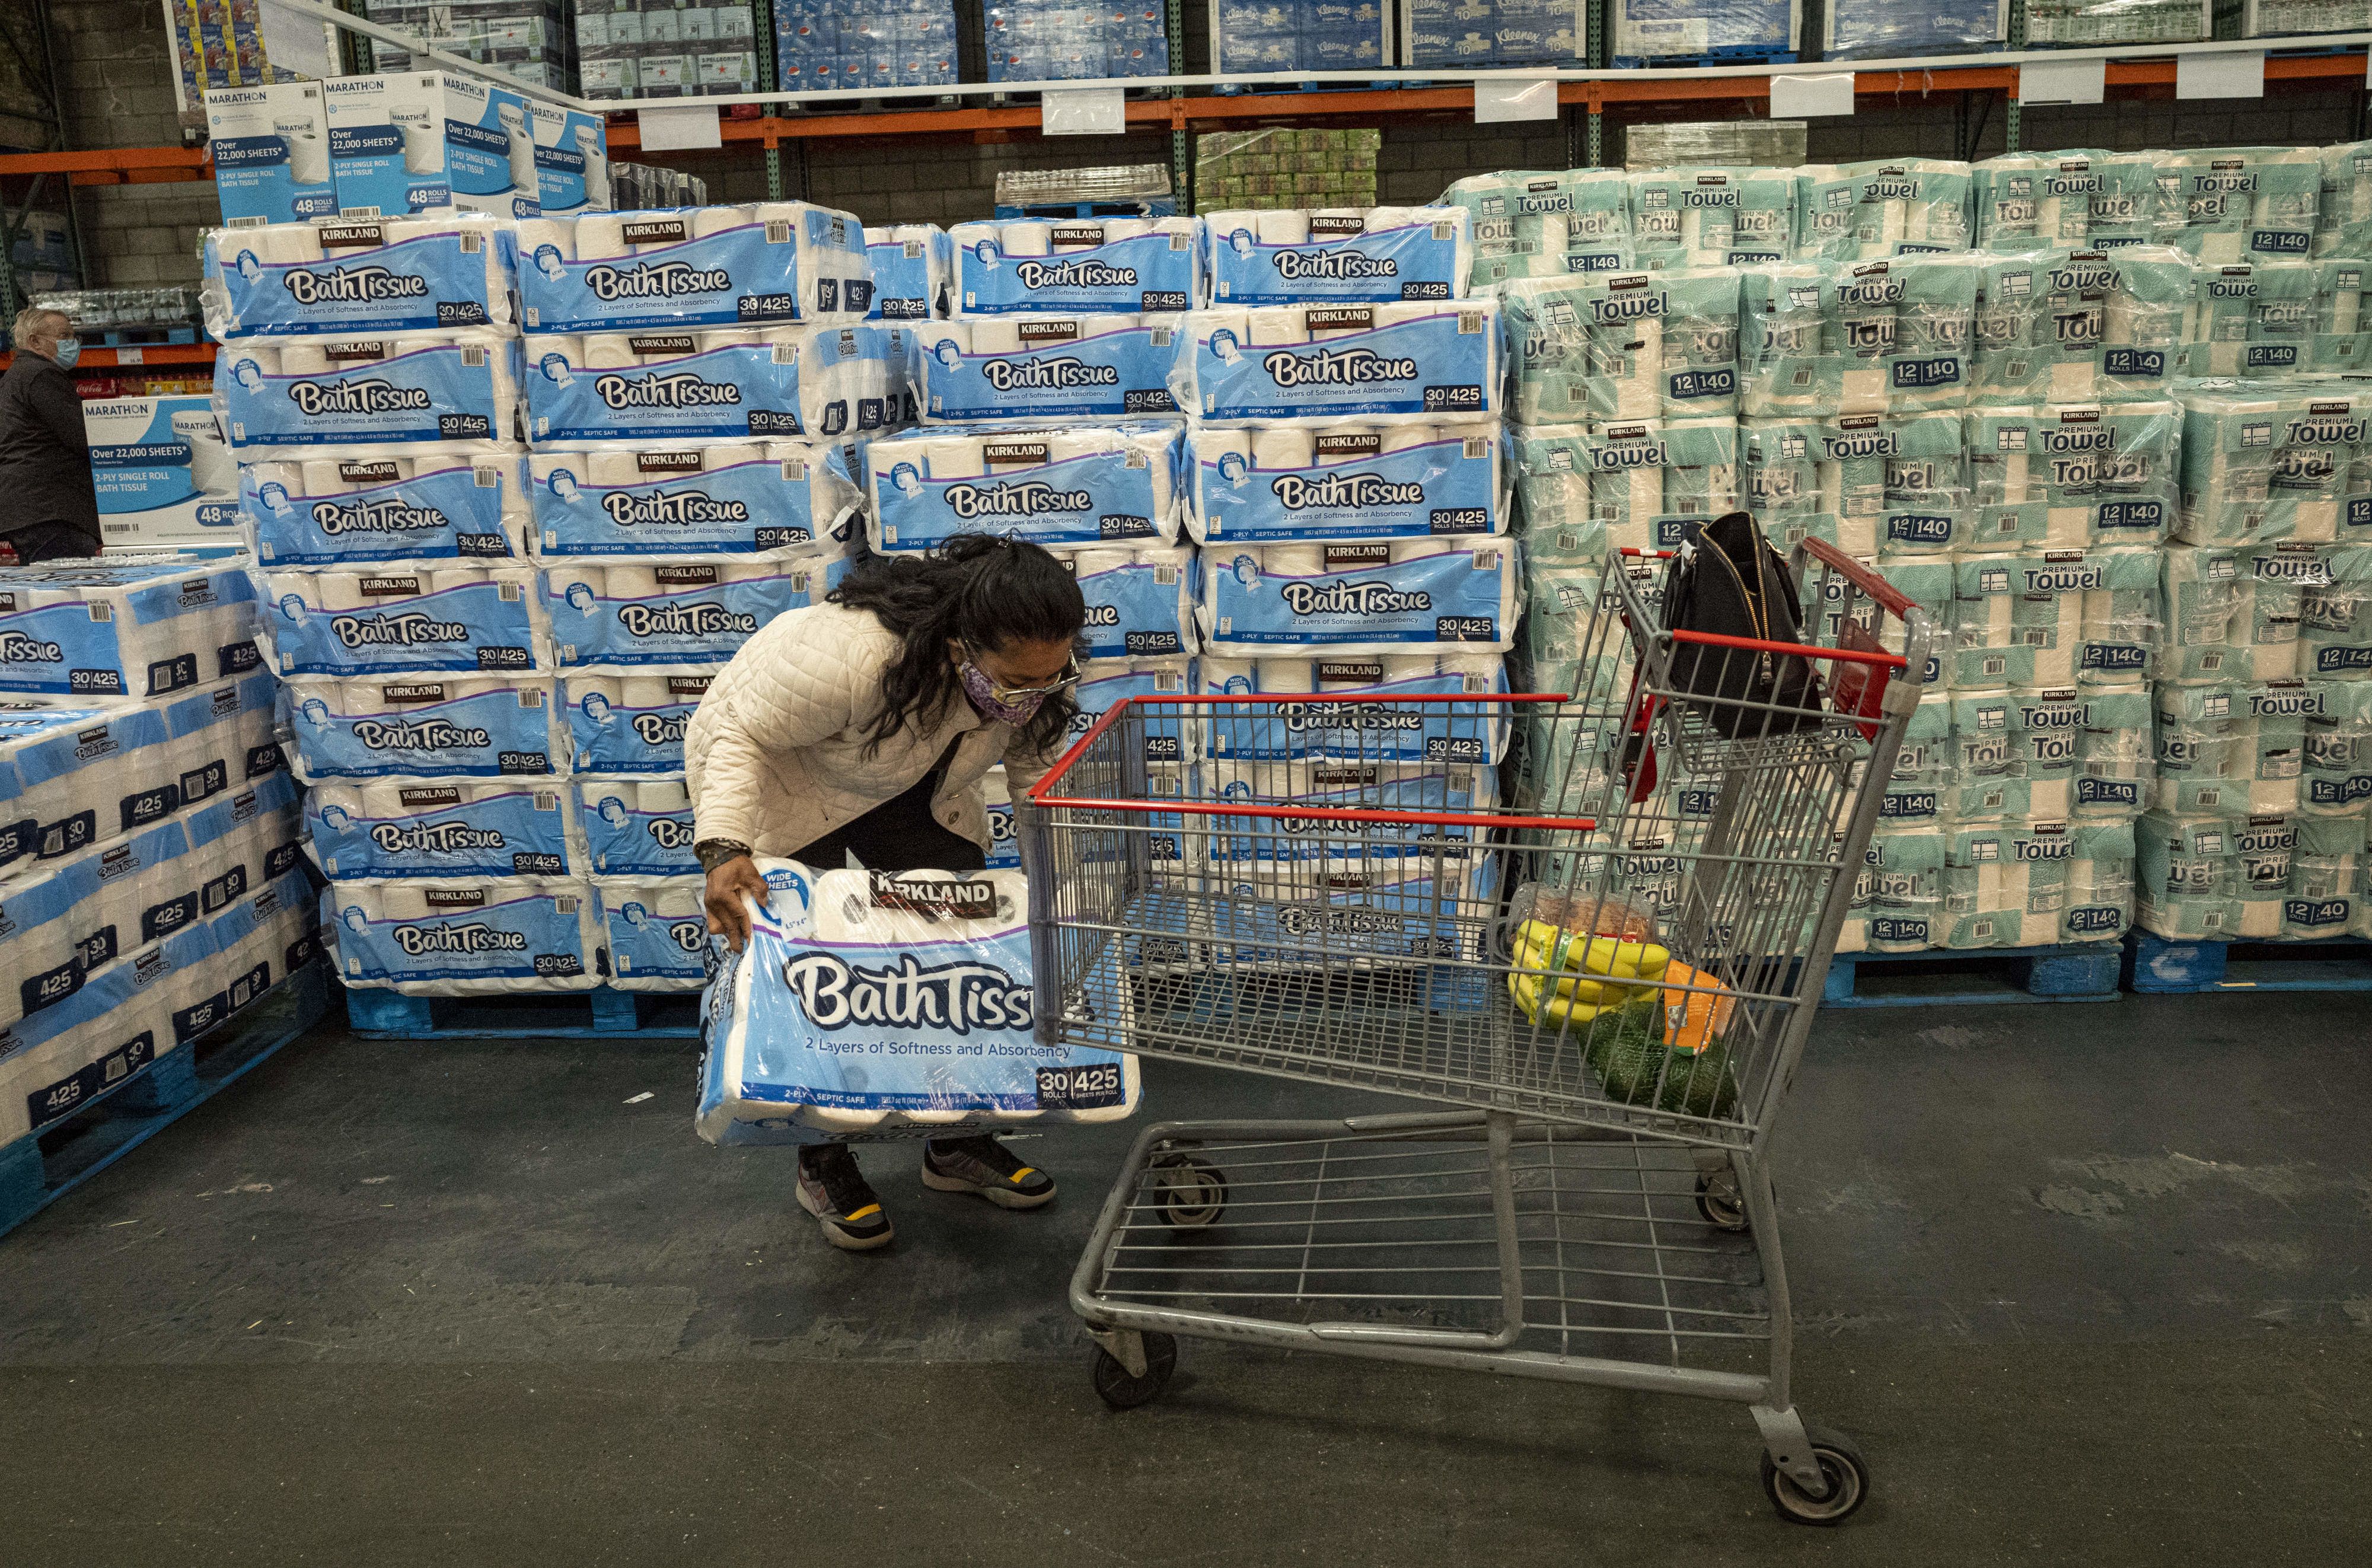 Here are the big brands hidden behind Costco's Kirkland products